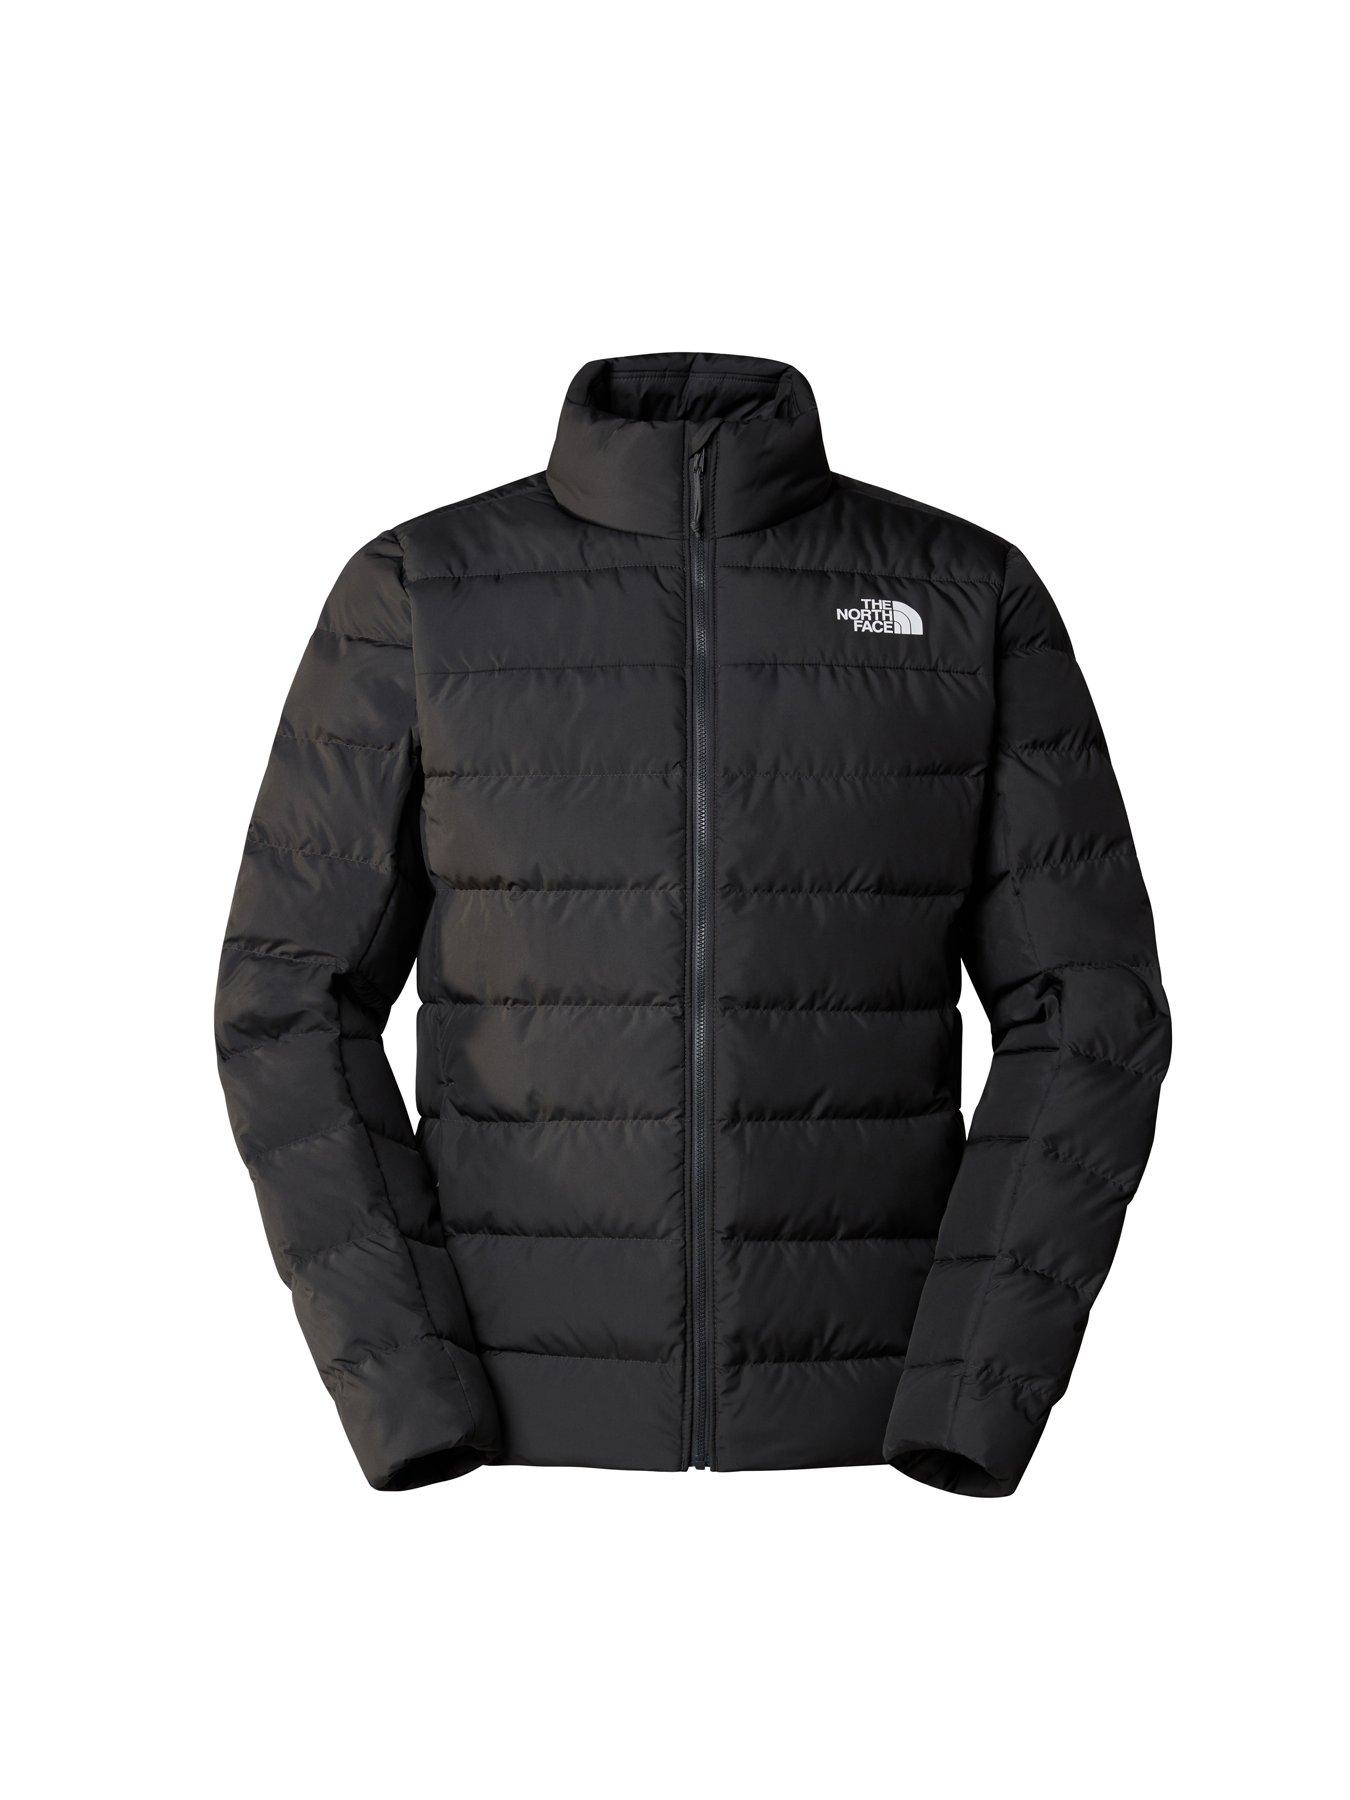 THE NORTH FACE Men's Aconcagua Jacket - Grey | very.co.uk